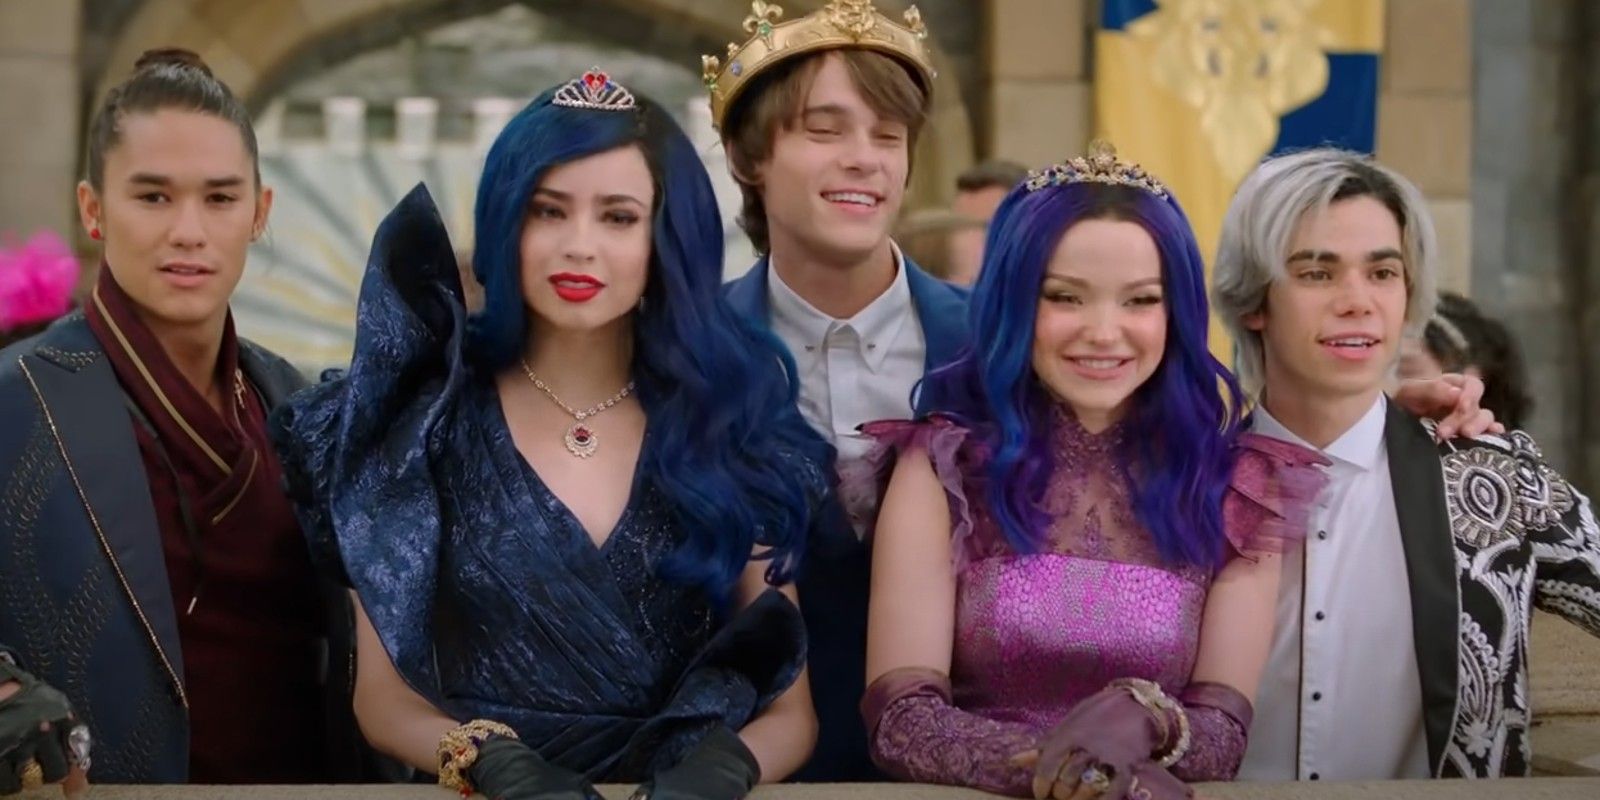 The main cast of Descendants leaning over a wall and smiling.